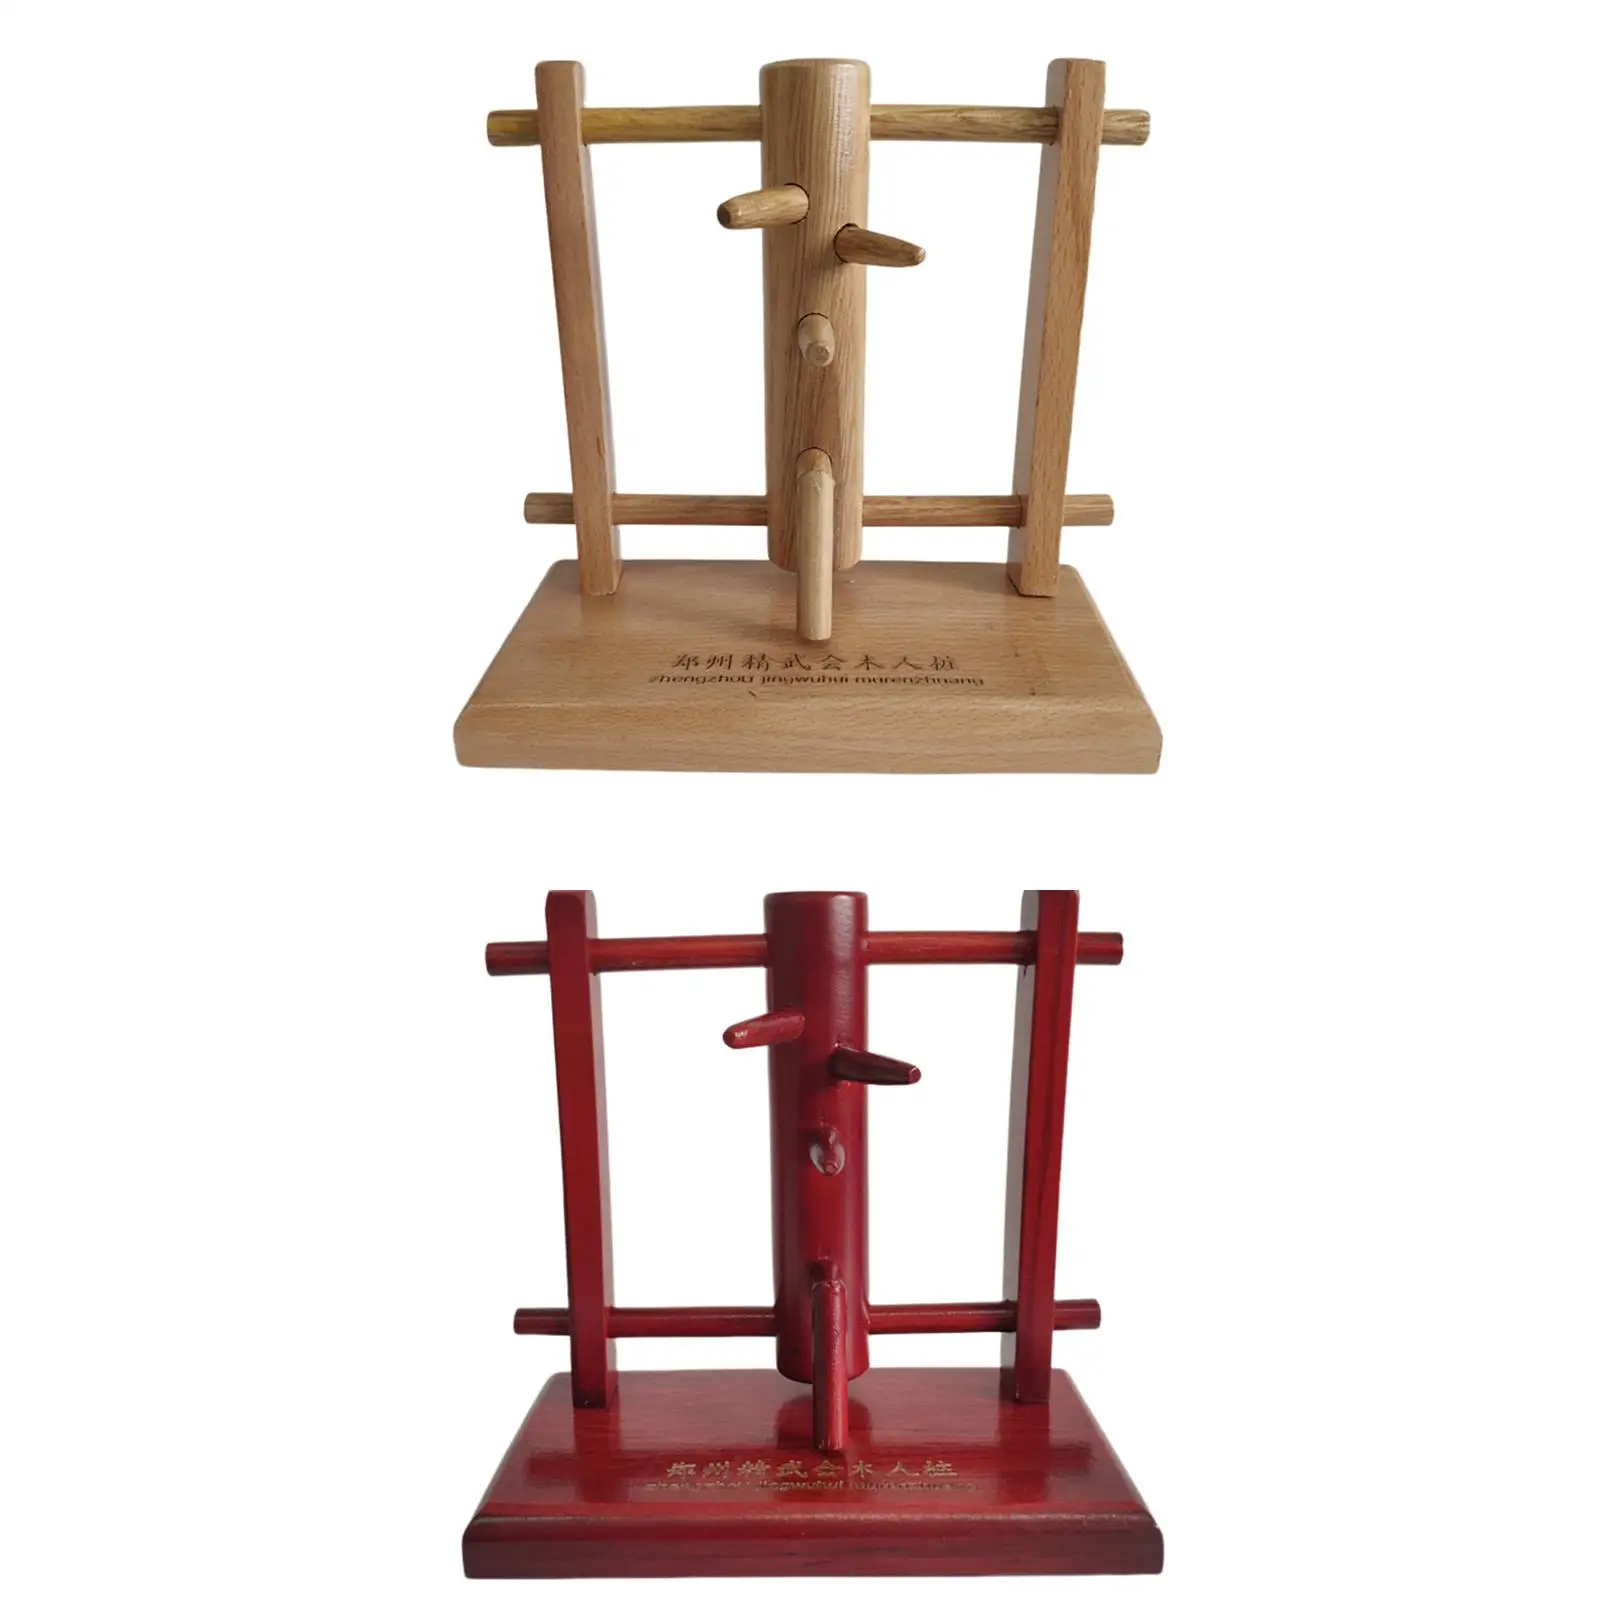 Wooden  Model Decor Display Figurine Wing Chun Hanging Collection Statue for Martial Arts School Living Room Shelves Car